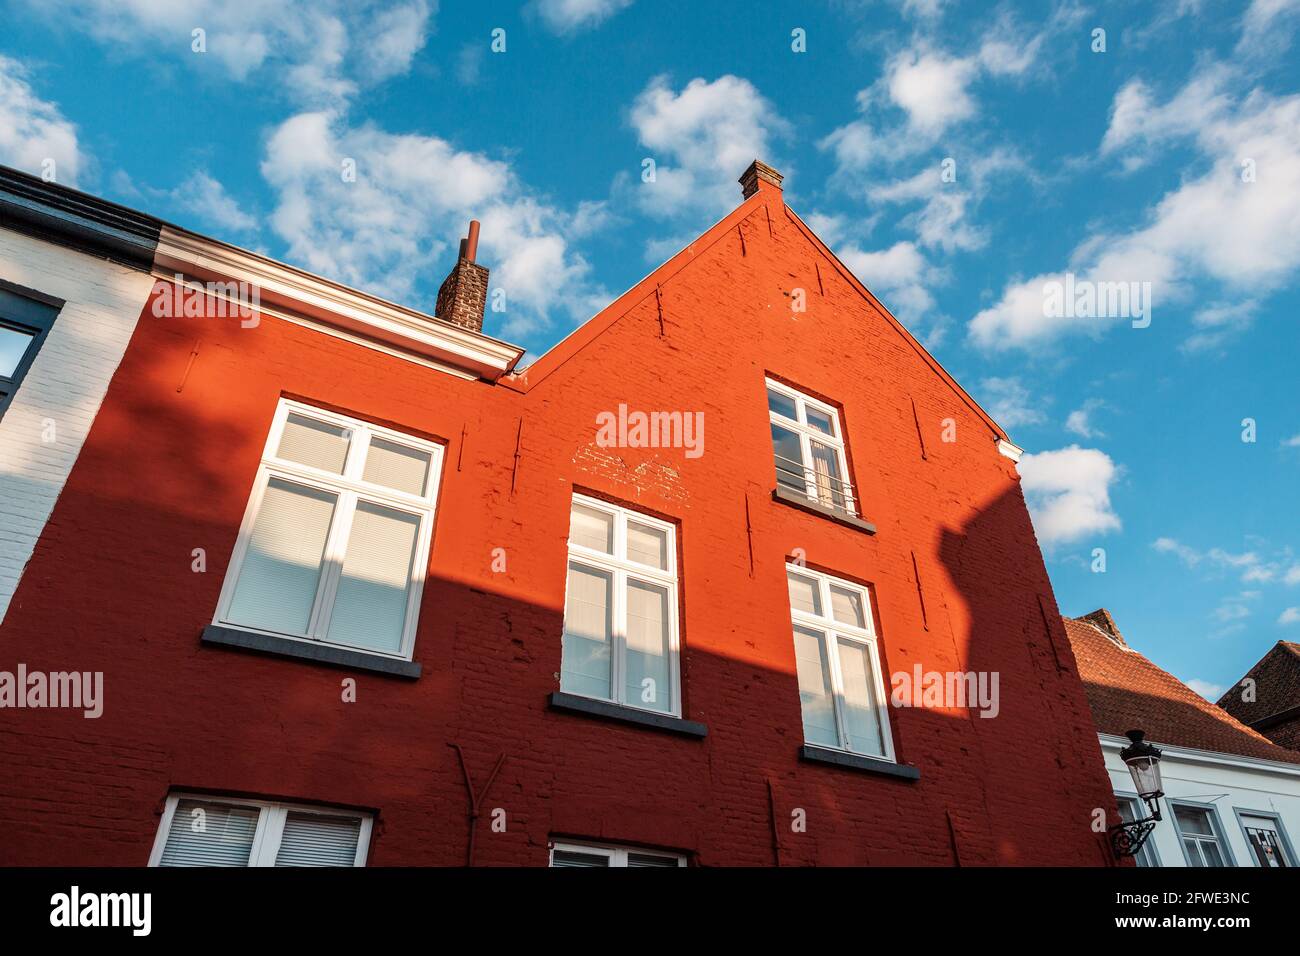 Close-up of a red vibrant color facade made of bricks against the blue sky in Bruges, Belgium. Stock Photo